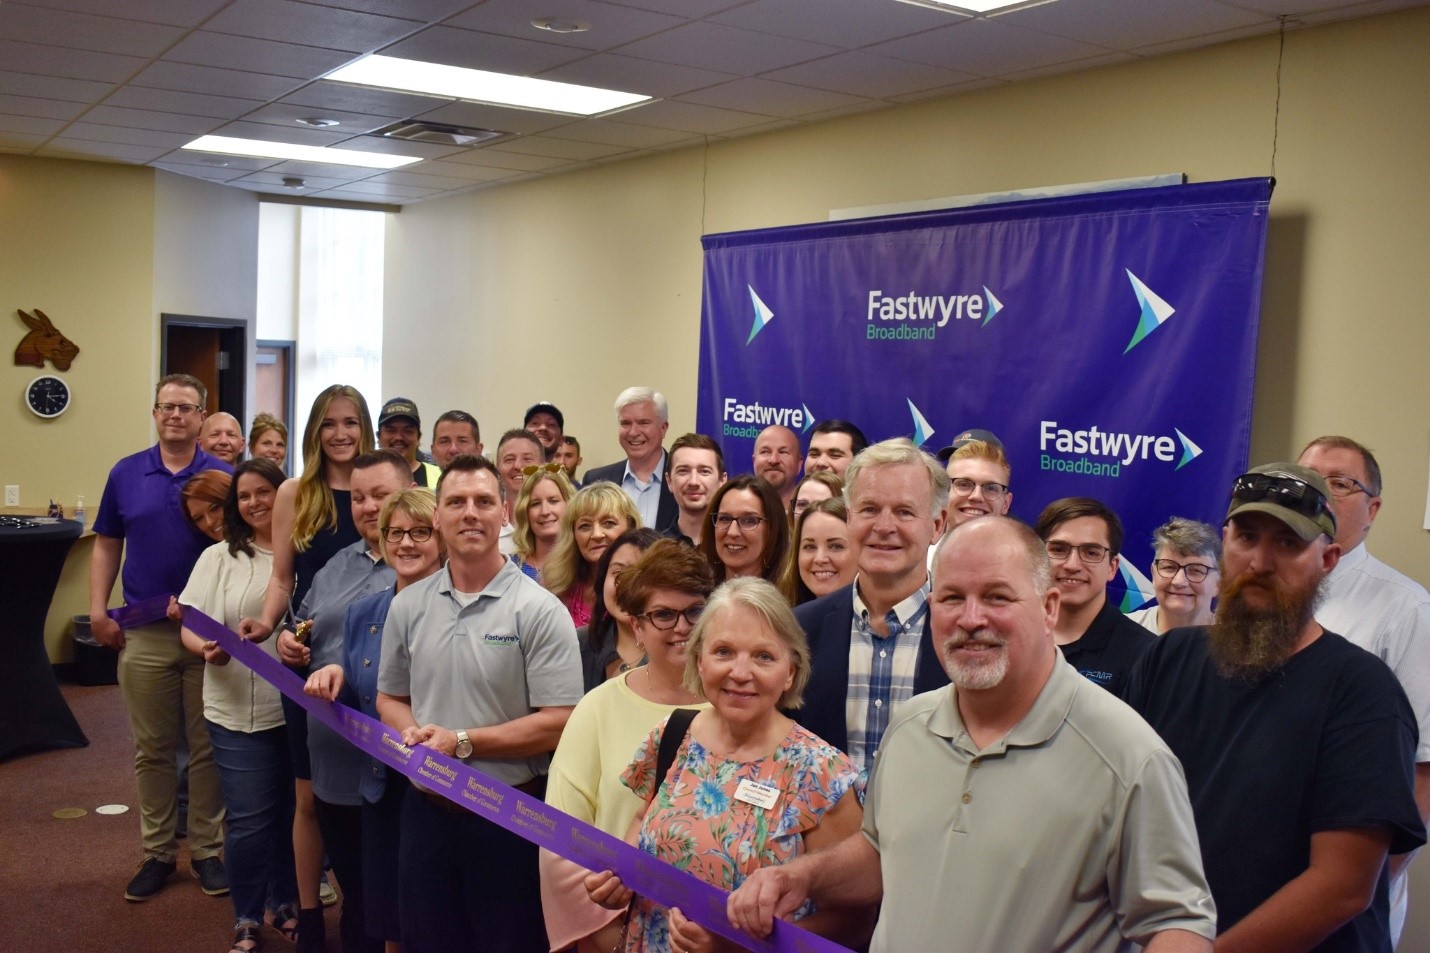 Representatives from the City of Warrensburg and state of Missouri celebrate at a recent ribbon-cutting ceremony for Fastwyre Broadband, which launched its high-speed, affordable fiber-optic network in the Warrensburg area for residents and businesses. Pictured in the front row are, from left: Greg Hall, F & C Bank Senior Vice President; Erica Jones, Open Country; Alicia Haynes, Open Country; Mariah Rudy, Fastwyre Broadband; D.J. Morris, Fastwyre Broadband; Suzanne Taylor, Warrensburg Chamber of Commerce Executive Director; Jayte Burns, Fastwyre Broadband; Stormy Taylor, Johnson County Recorder of Deeds; Jan Jones, Warrensburg City Council member and Missouri Rep. Dan Houx. Warrensburg Mayor Jim Kushner (back row, far right) welcomed Fastwyre to the Warrensburg community.